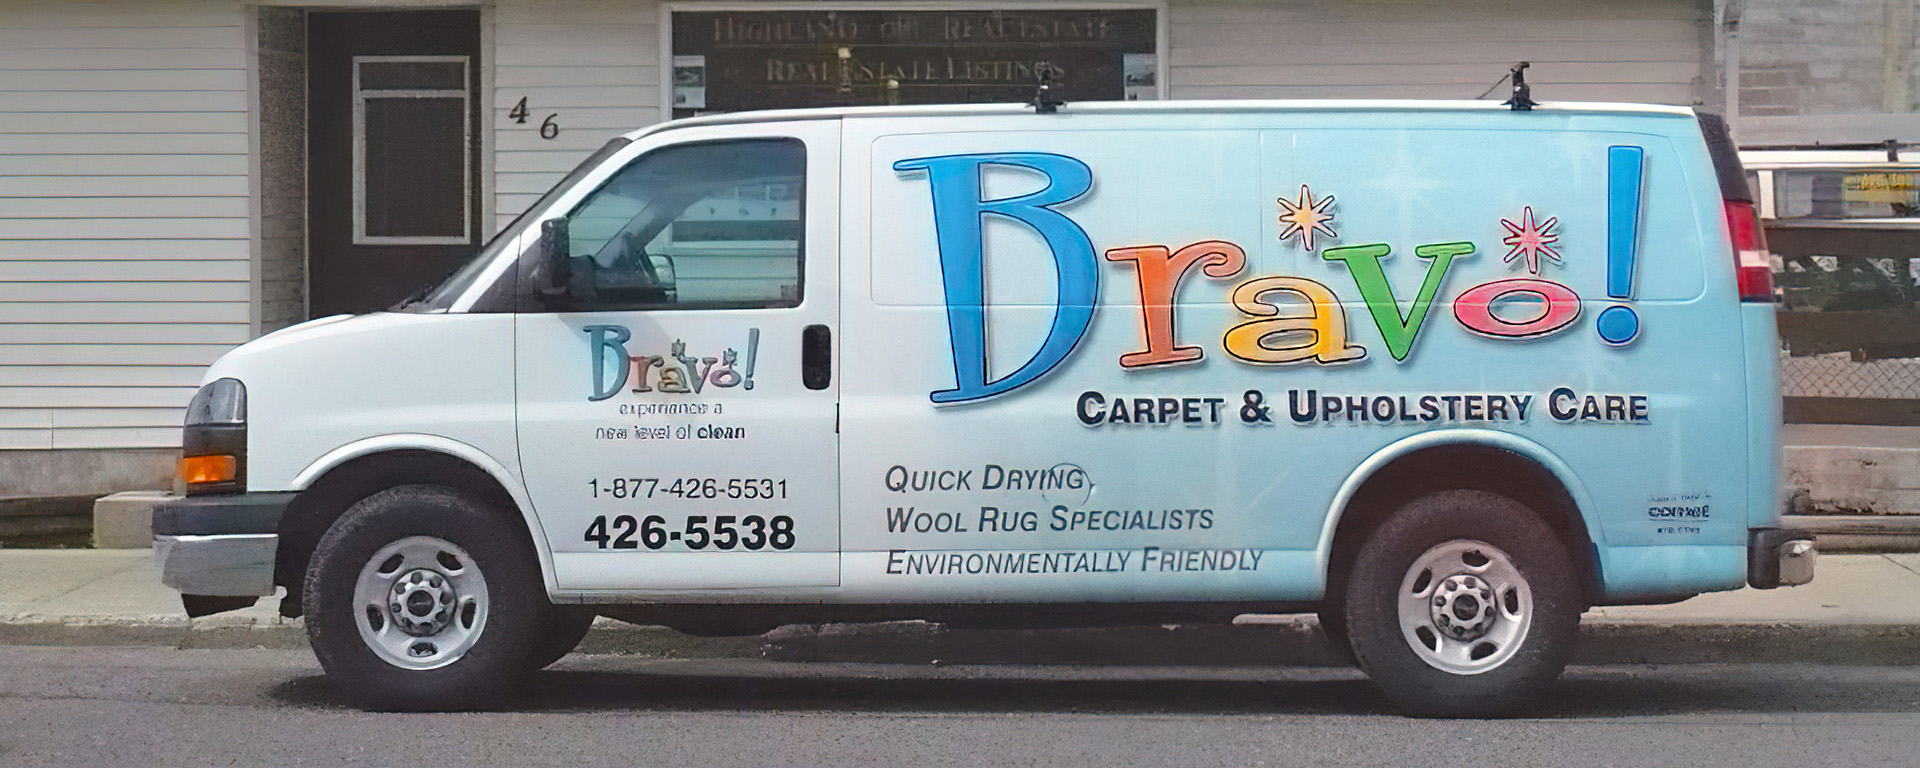 The Bravo Carpet & Upholstery Care white van with the multi-coloured company logo and contact phone number printed on the side 